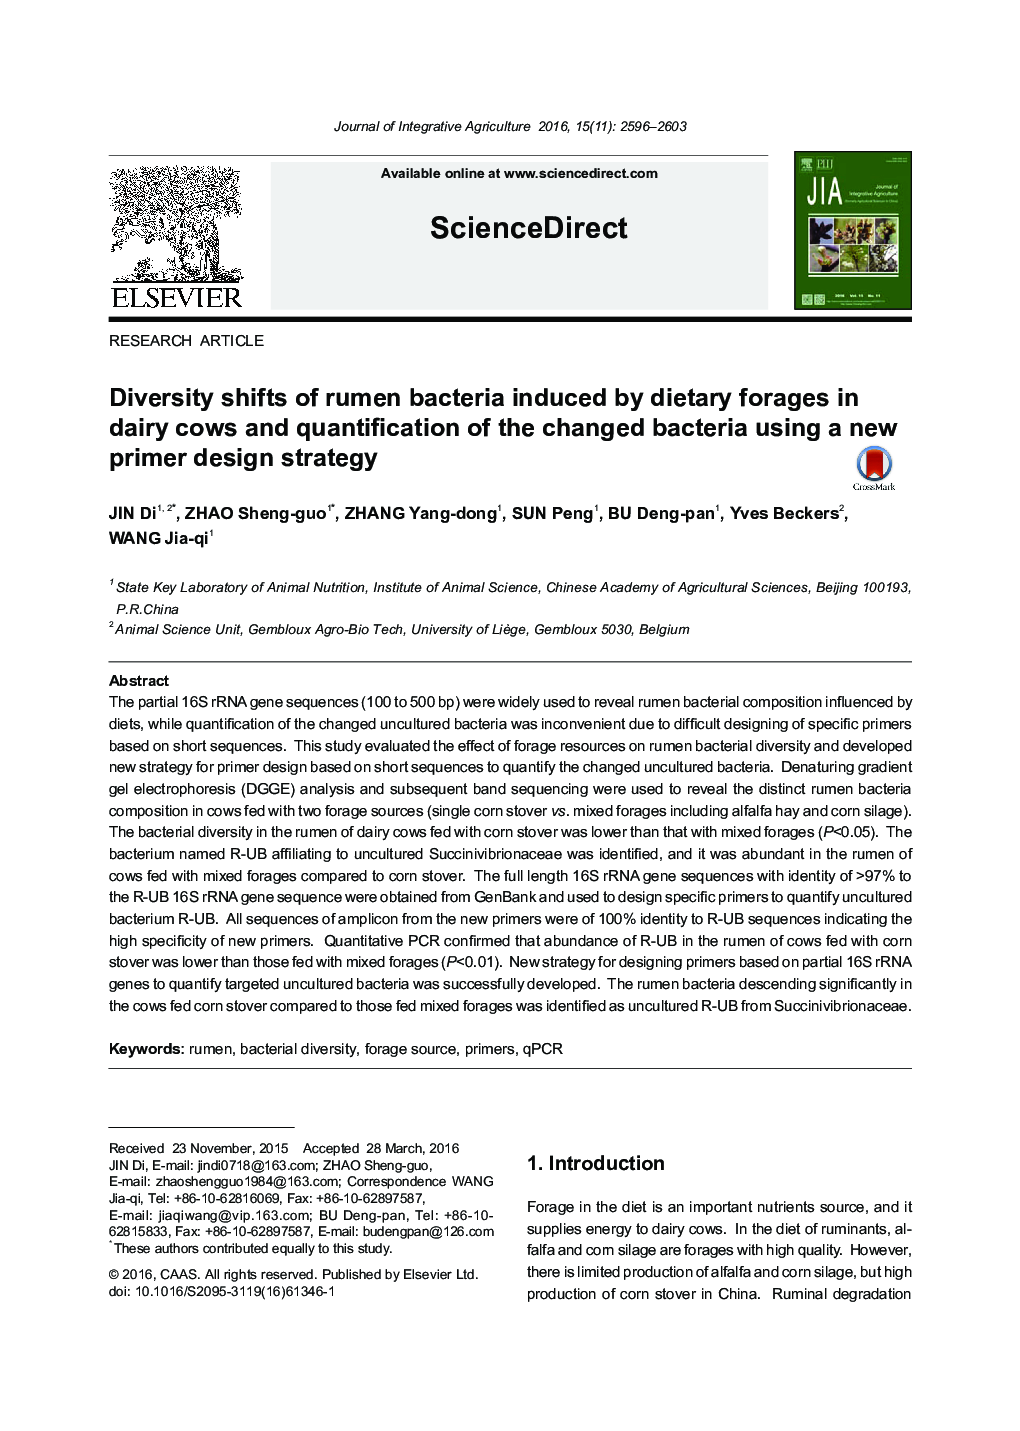 Diversity shifts of rumen bacteria induced by dietary forages in dairy cows and quantification of the changed bacteria using a new primer design strategy